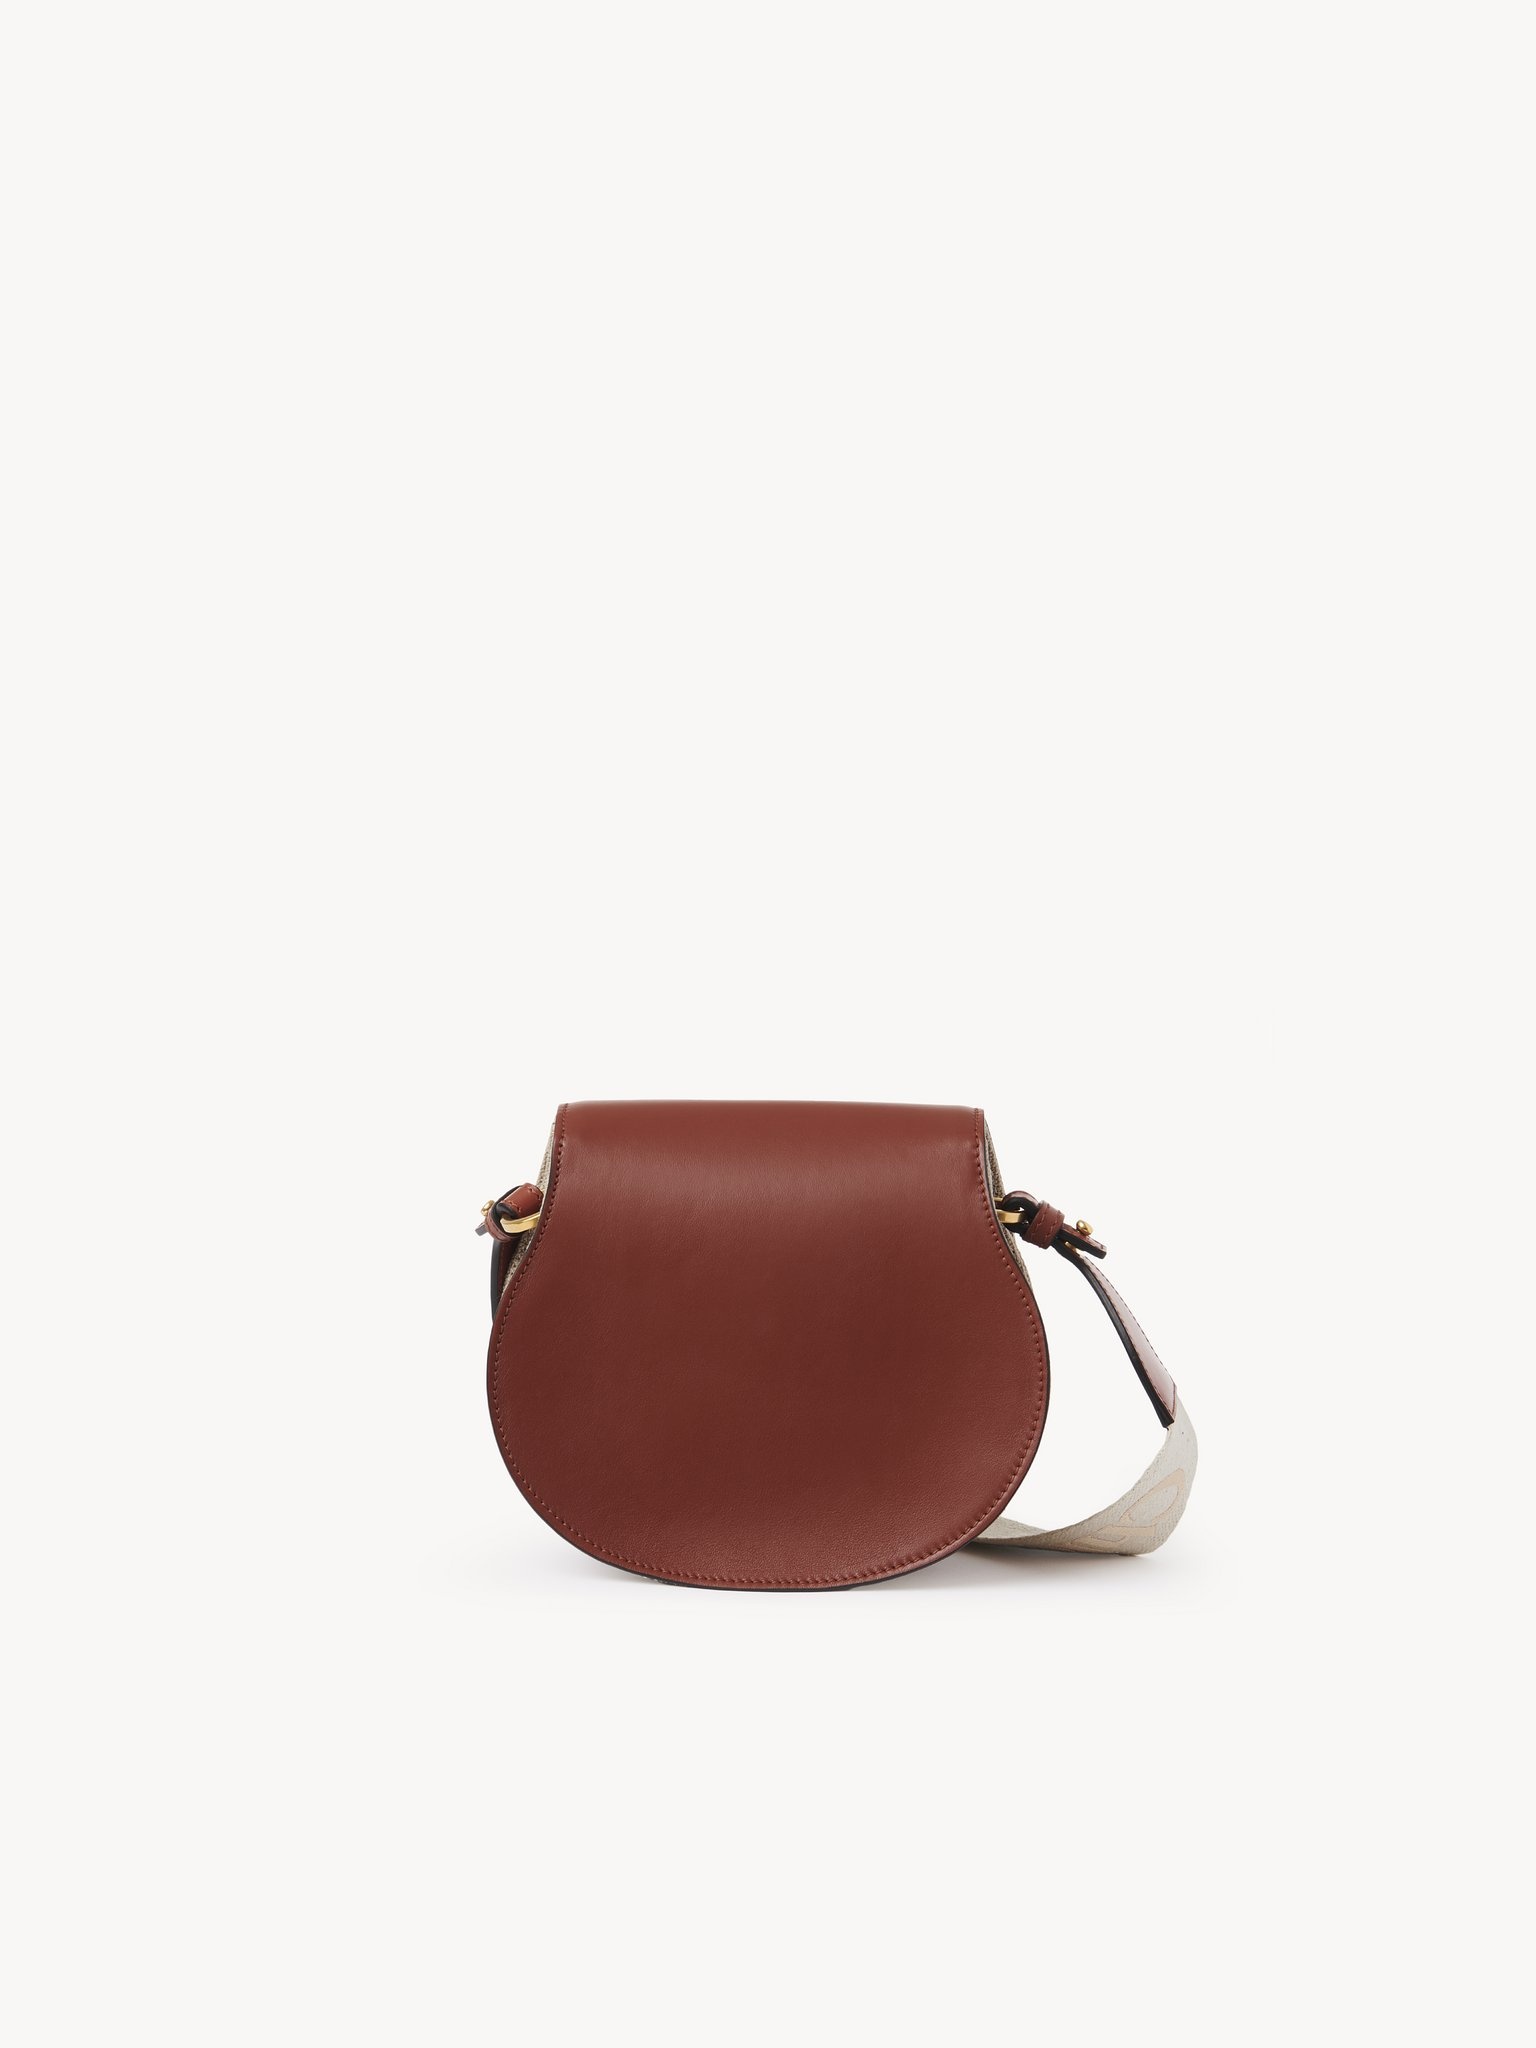 SMALL MARCIE SADDLE BAG IN LINEN & SMOOTH LEATHER - 4